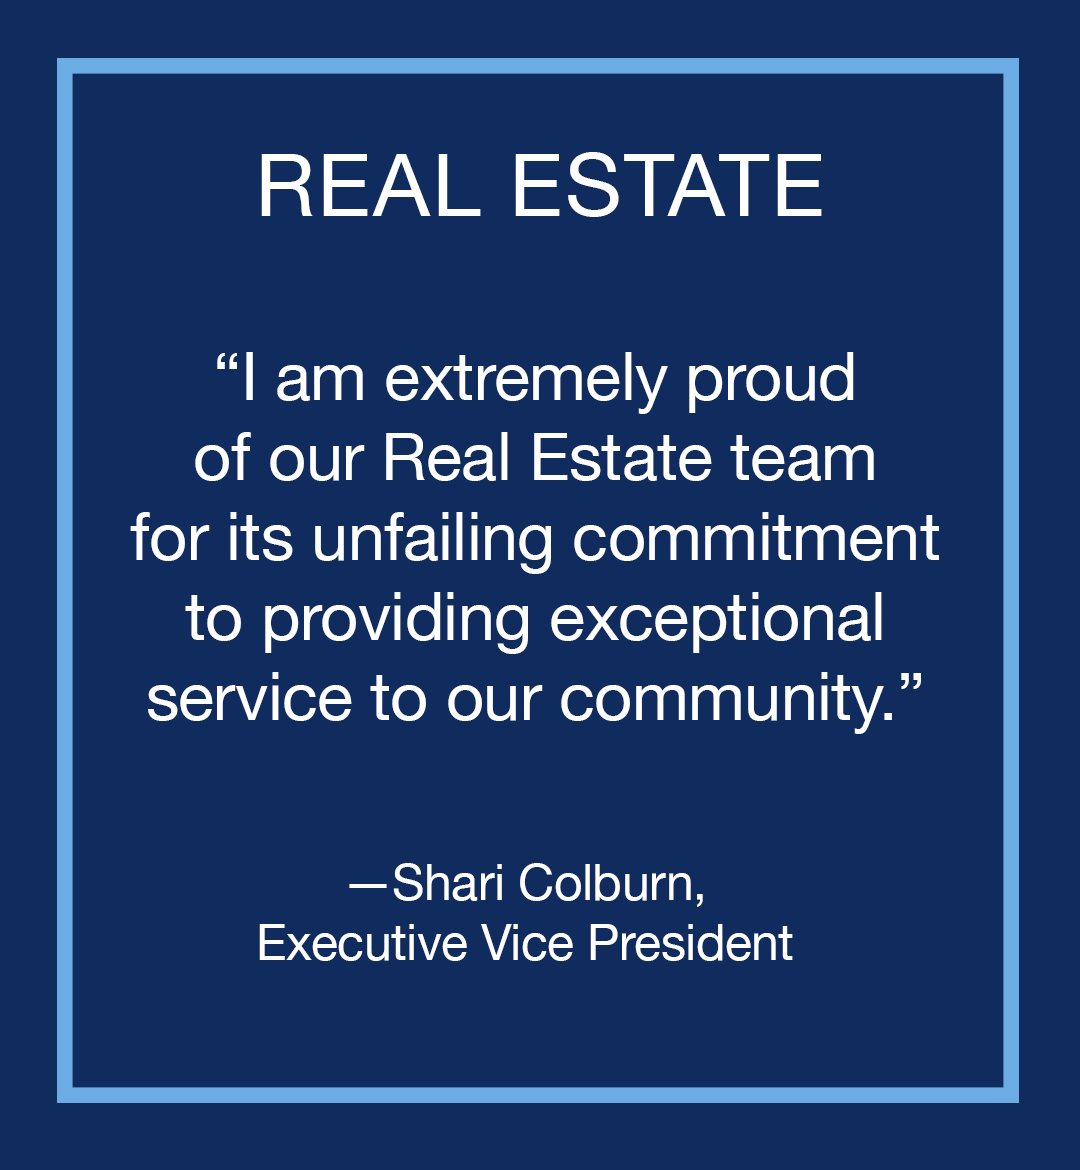 Image with text: Real Estate, "I am extremely proud of our Real Estate team for its unfailing commitment to providing exceptional service to our community," Shari Colburn, Executive Vice President